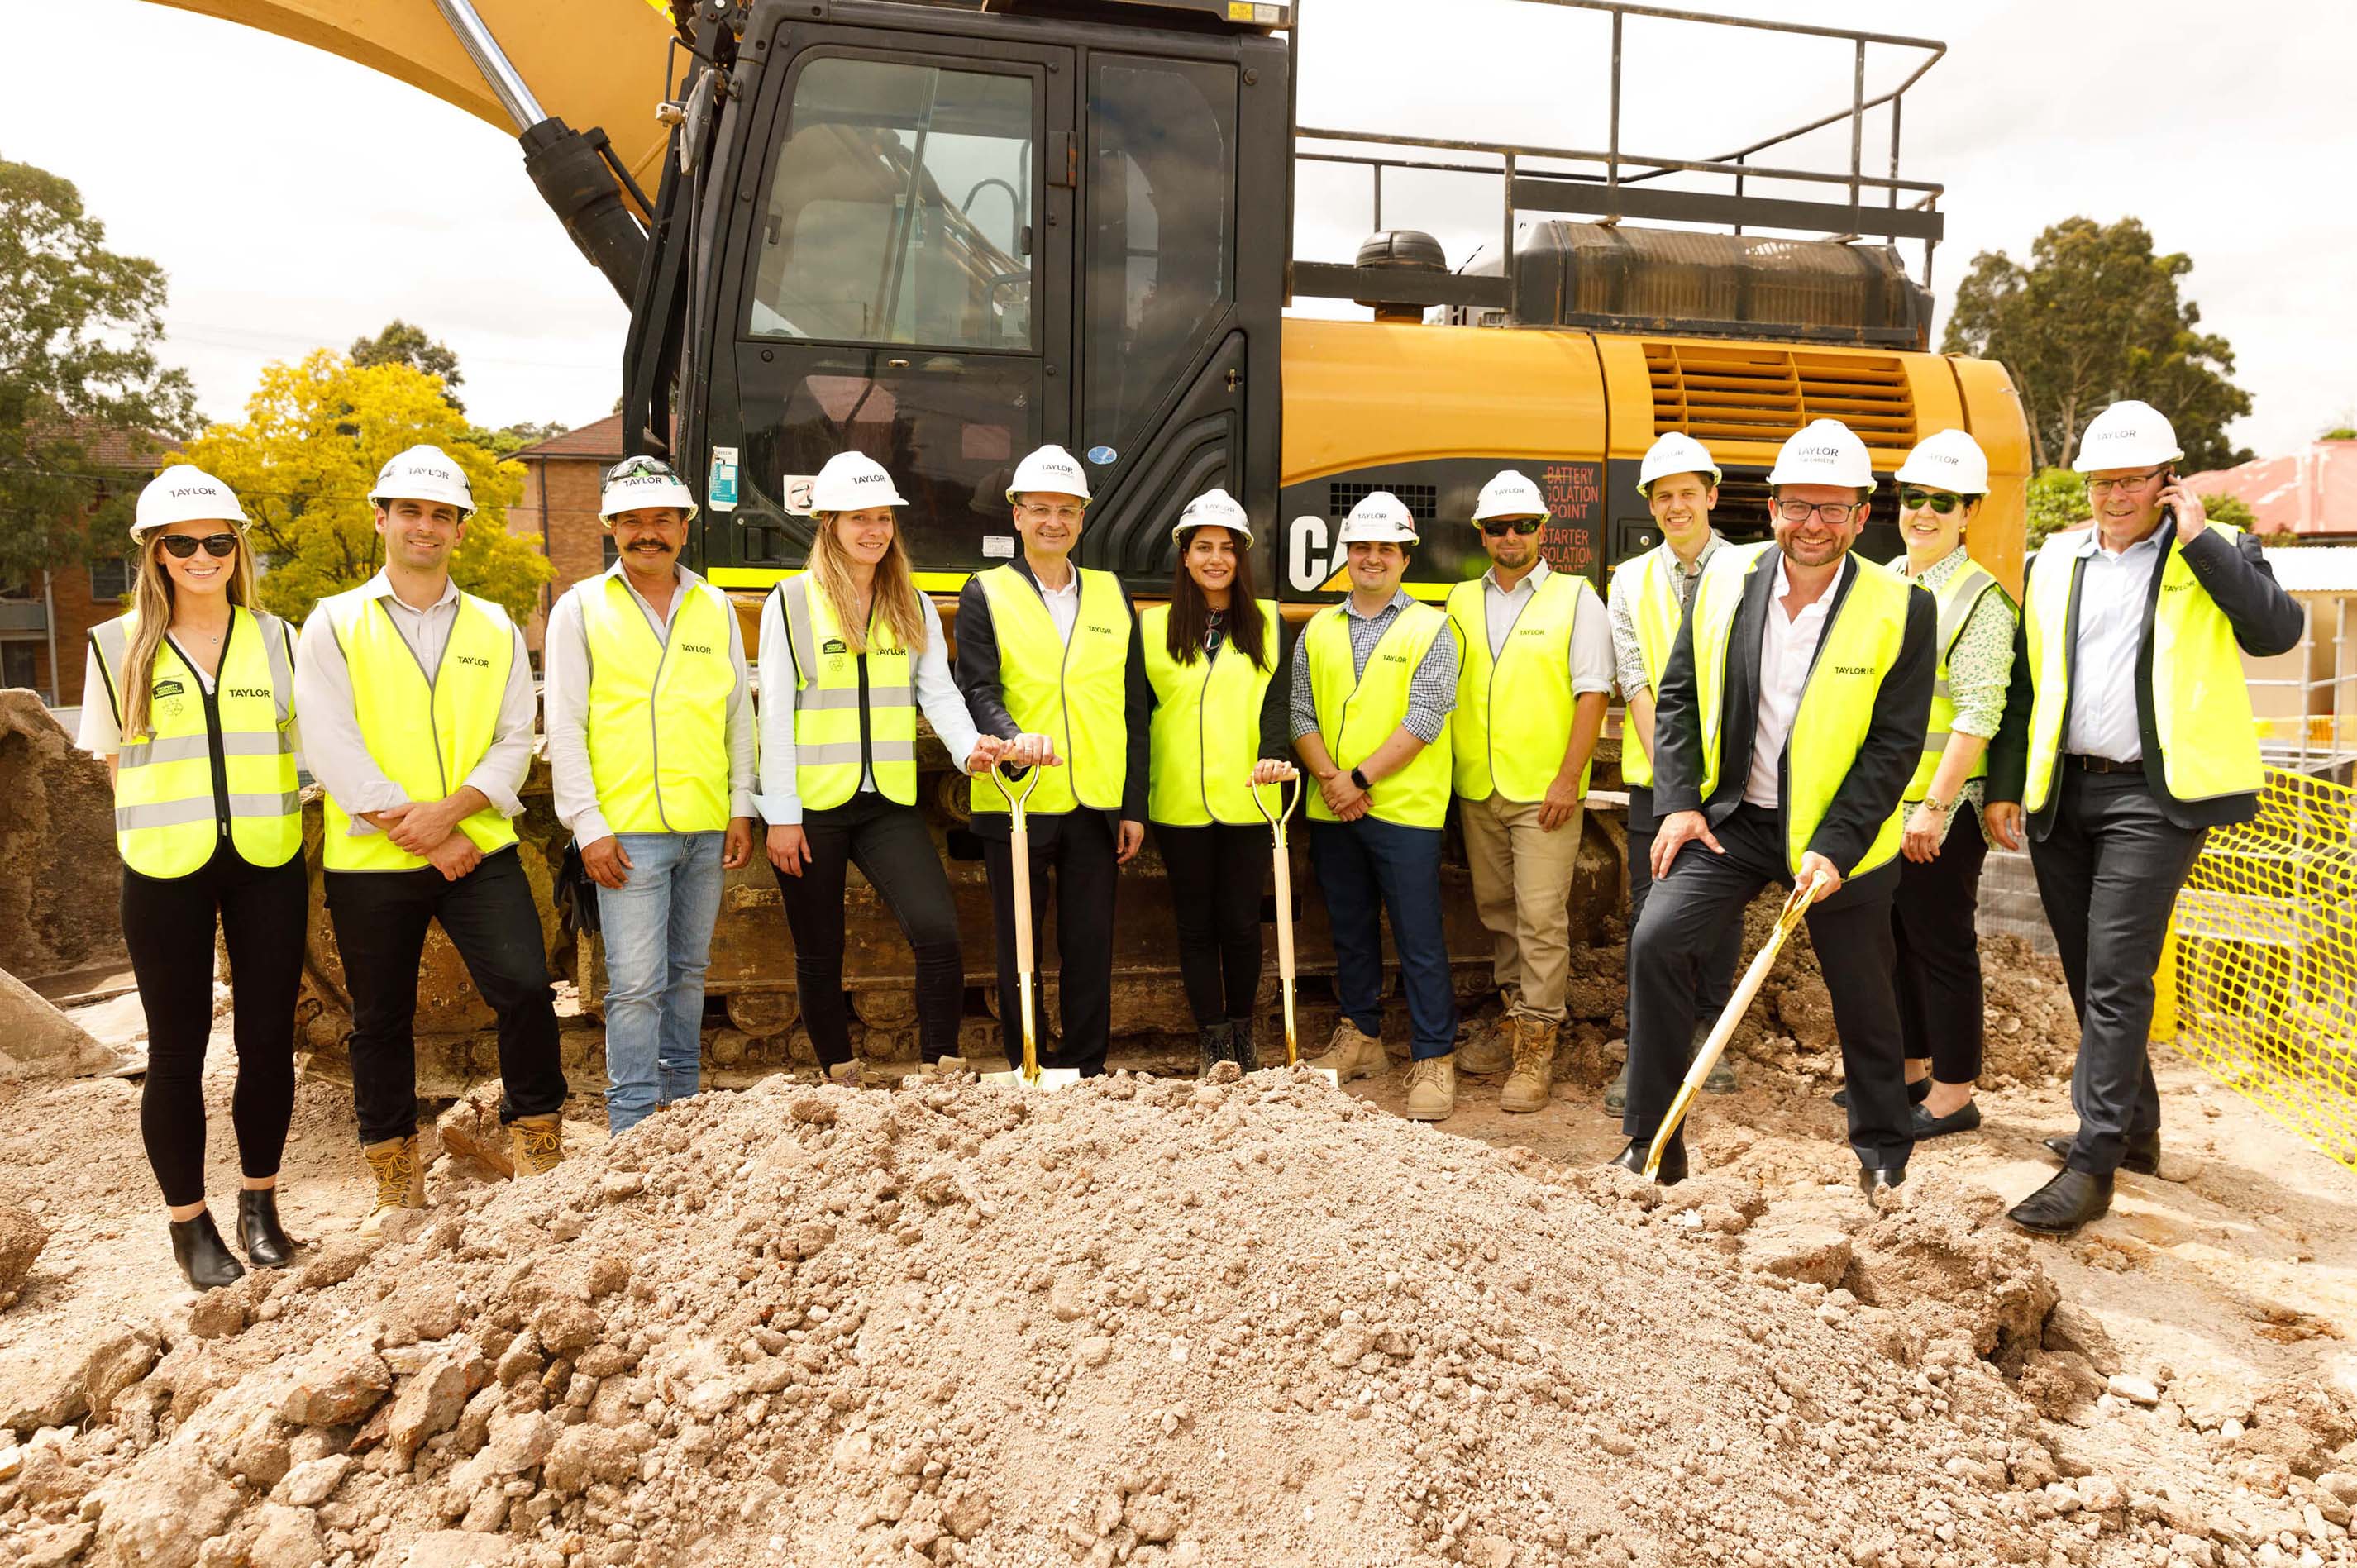 03 large team image at sod turning event taylor news article improving mental health in construction